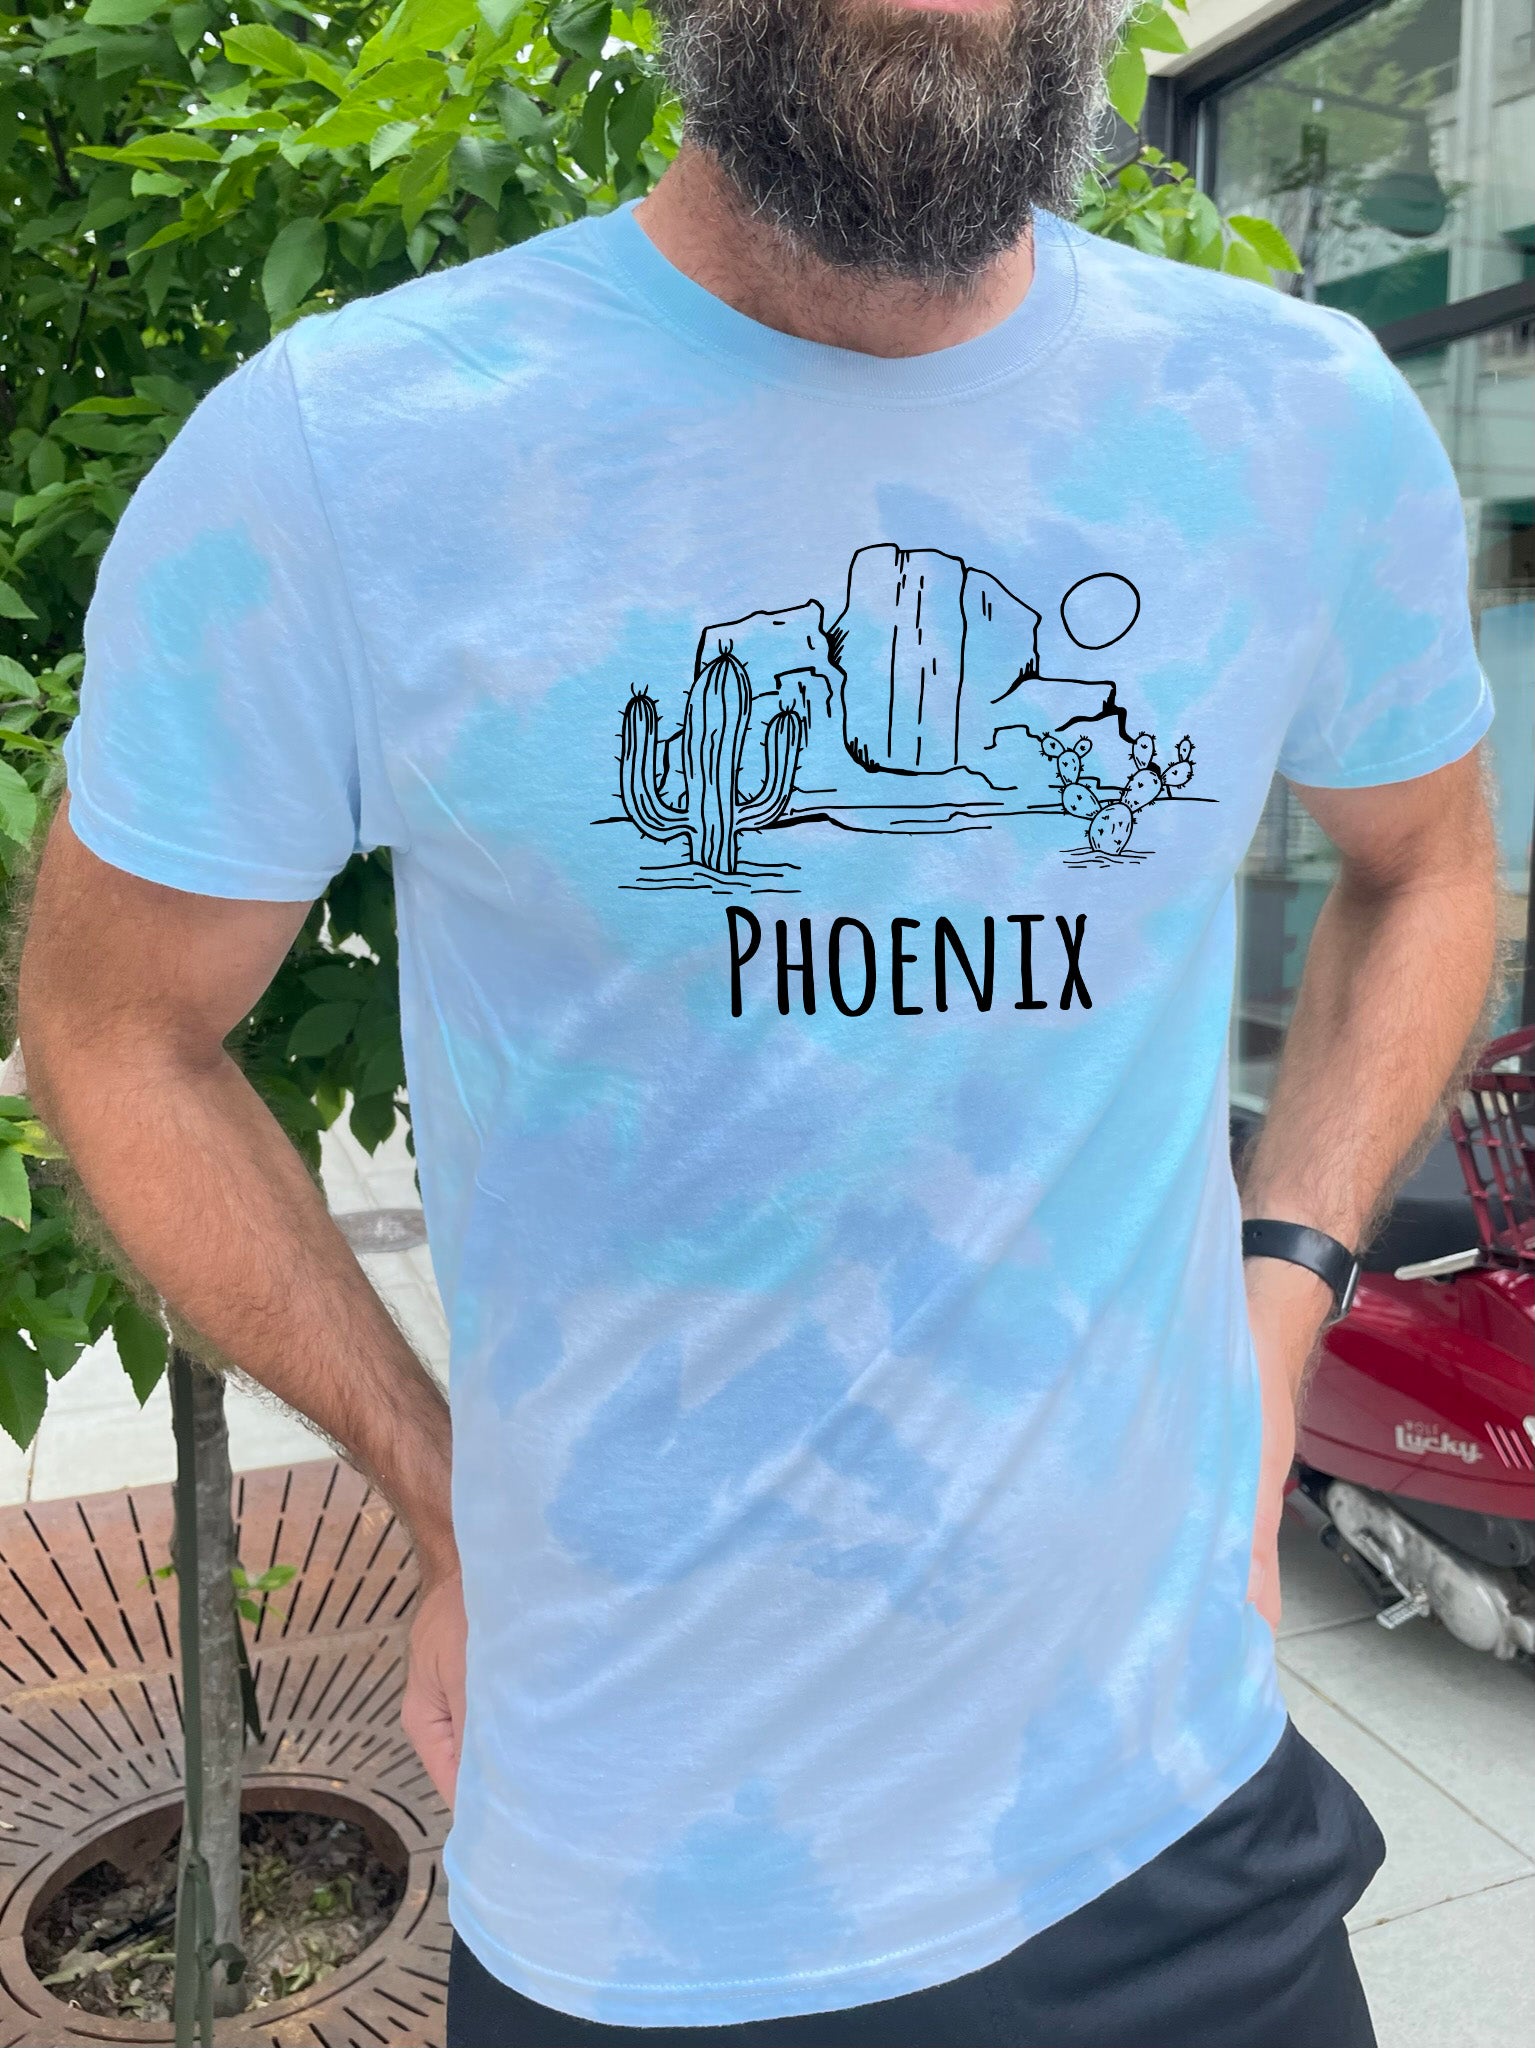 a man with a beard wearing a t - shirt that says phoenix